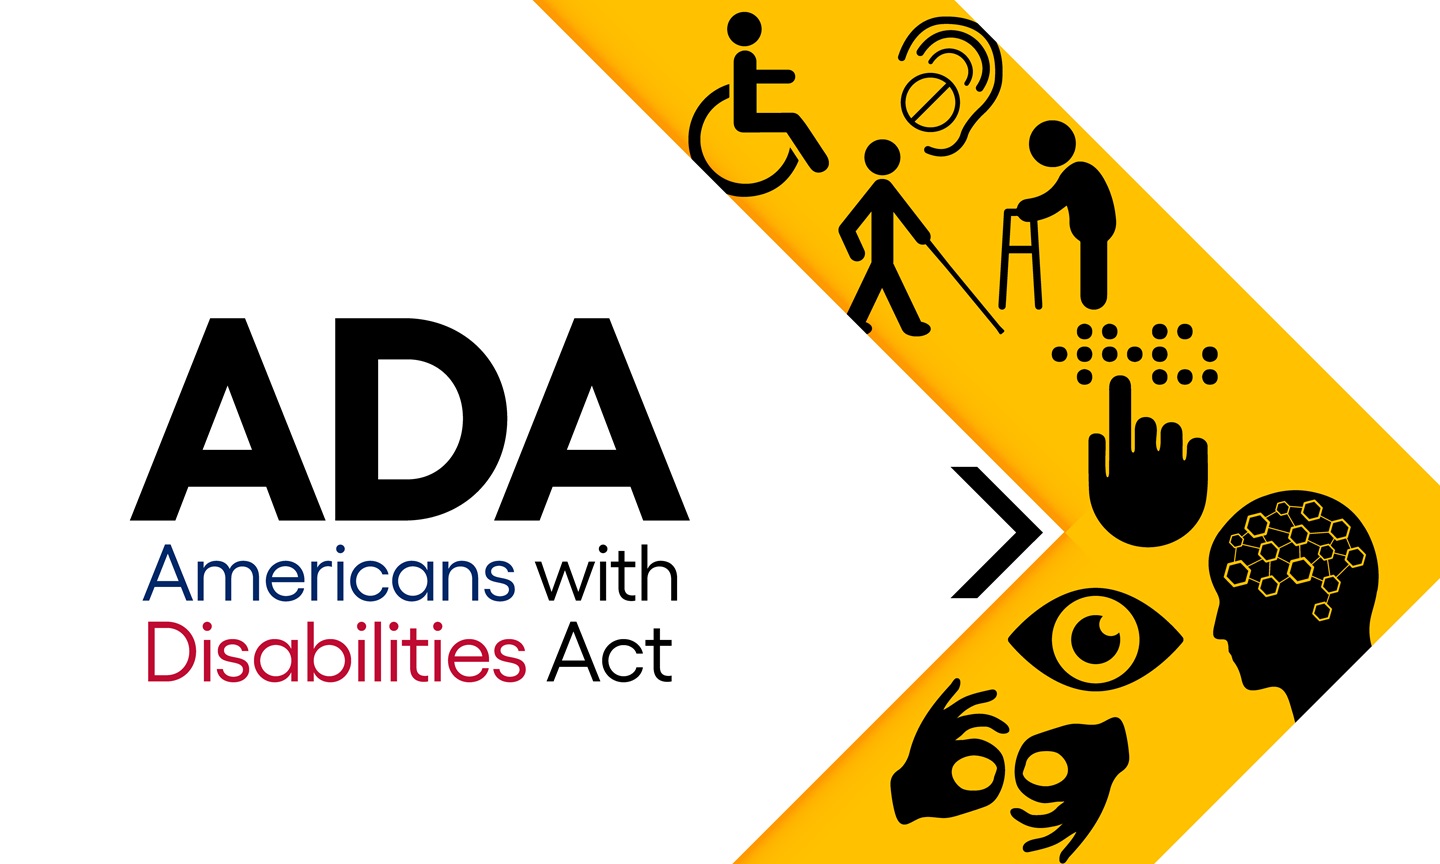 Texts: ADA - Americans with Disabilities Act next to various pictures of disability icons